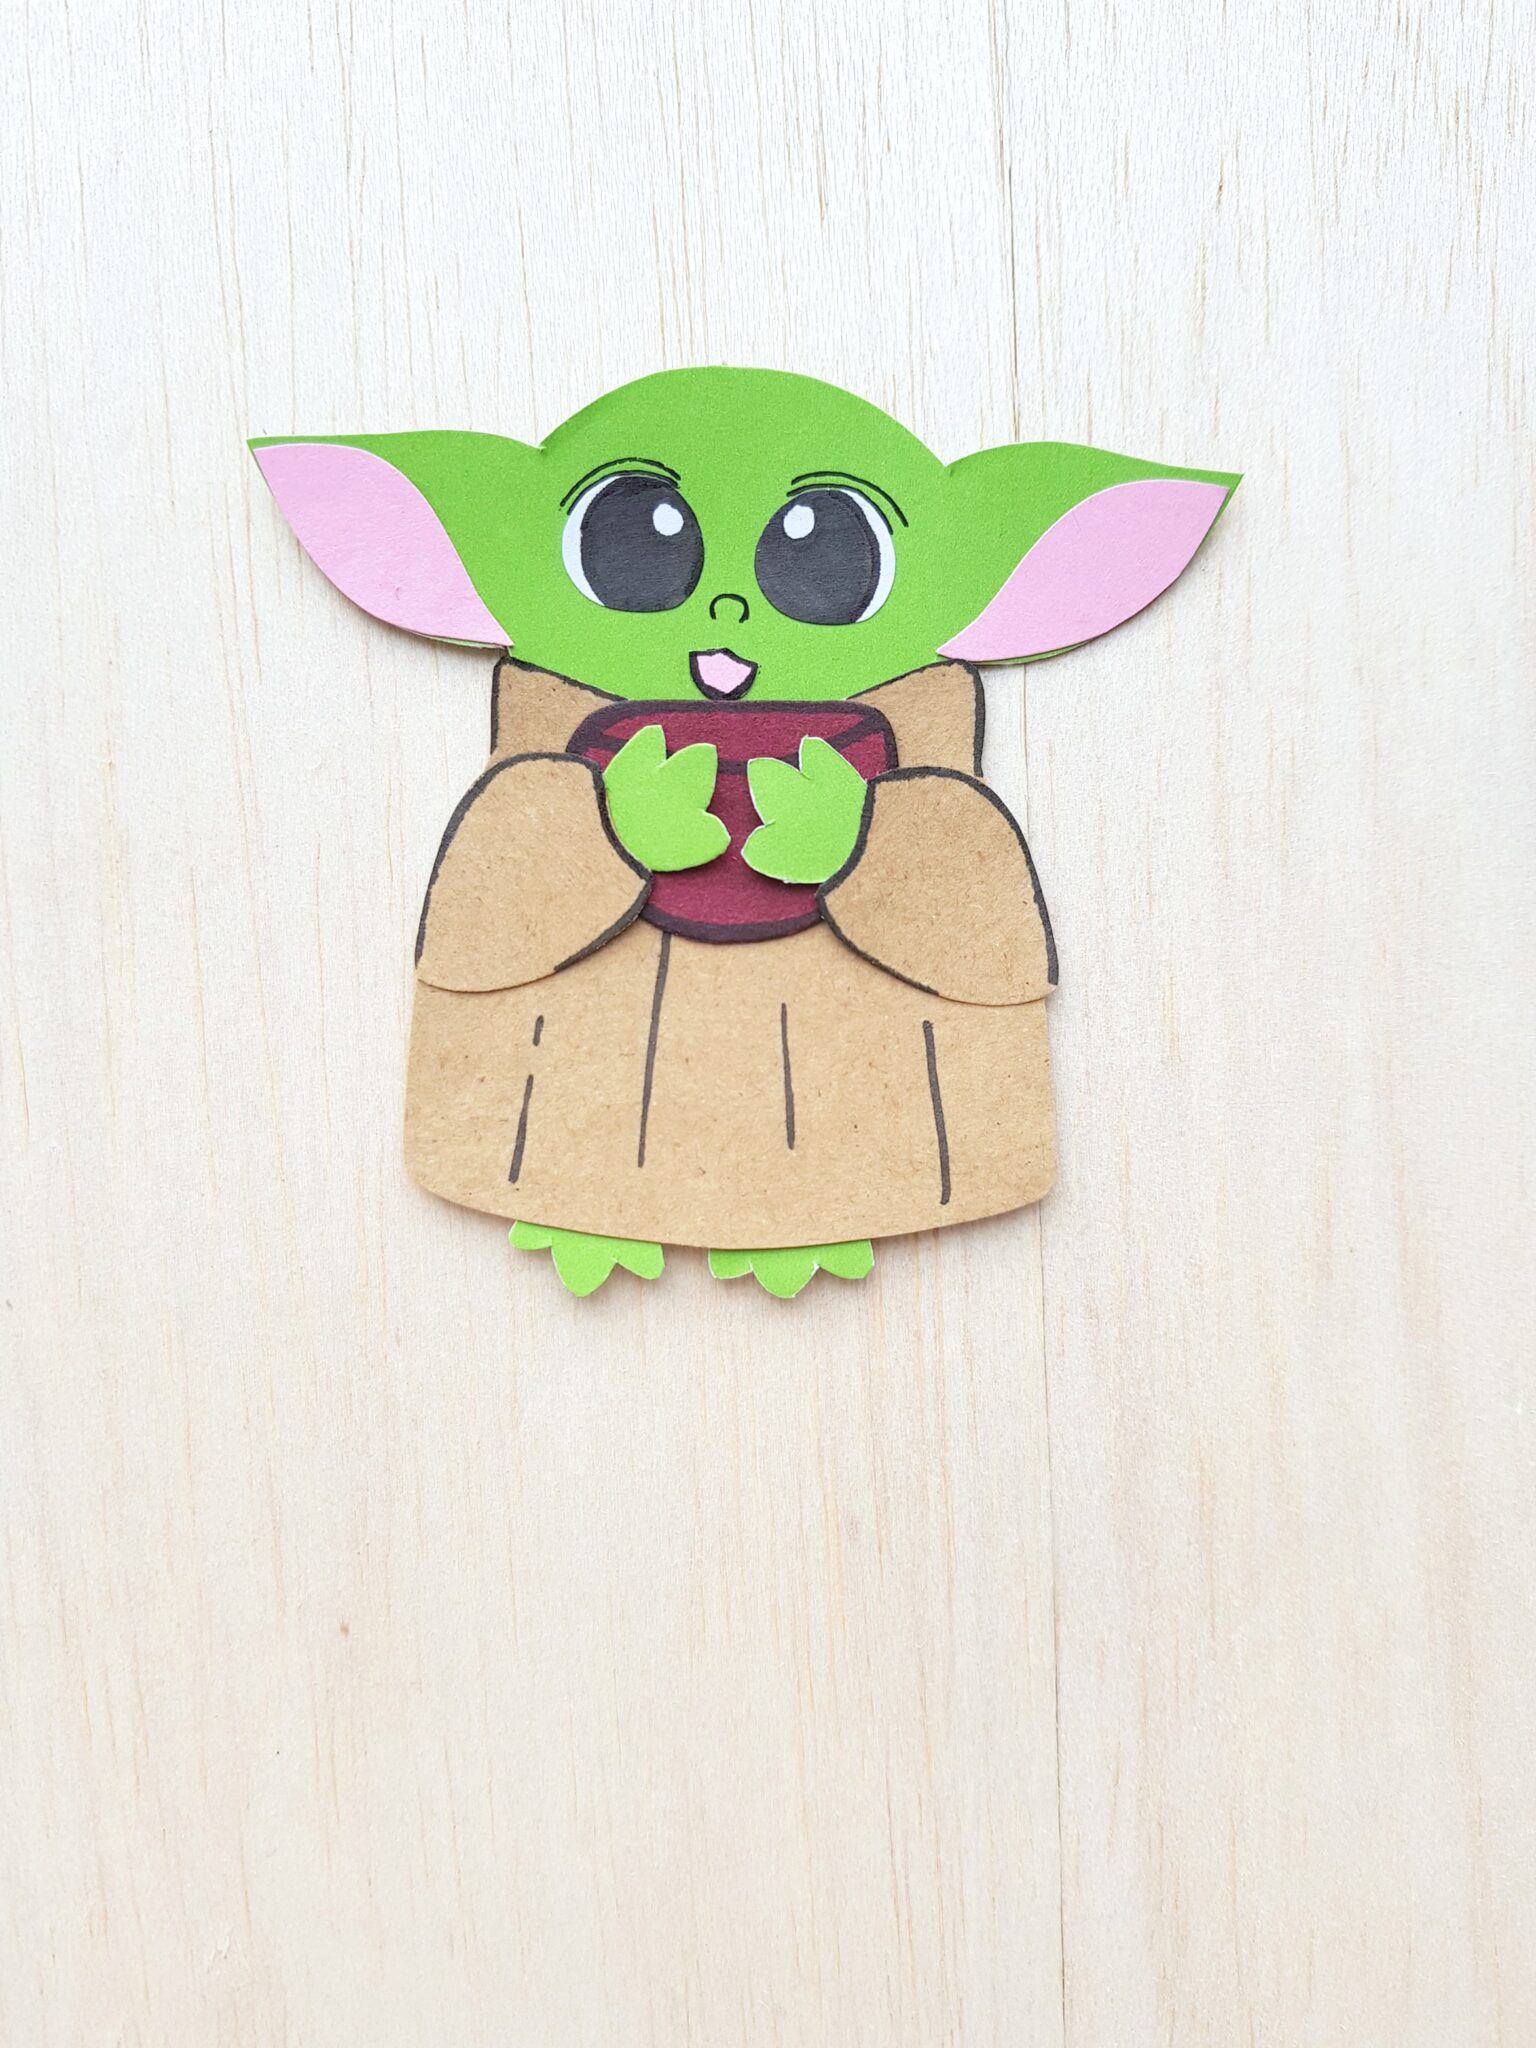 The final product of the Child aka Baby Yoda. He is now holding a cup.